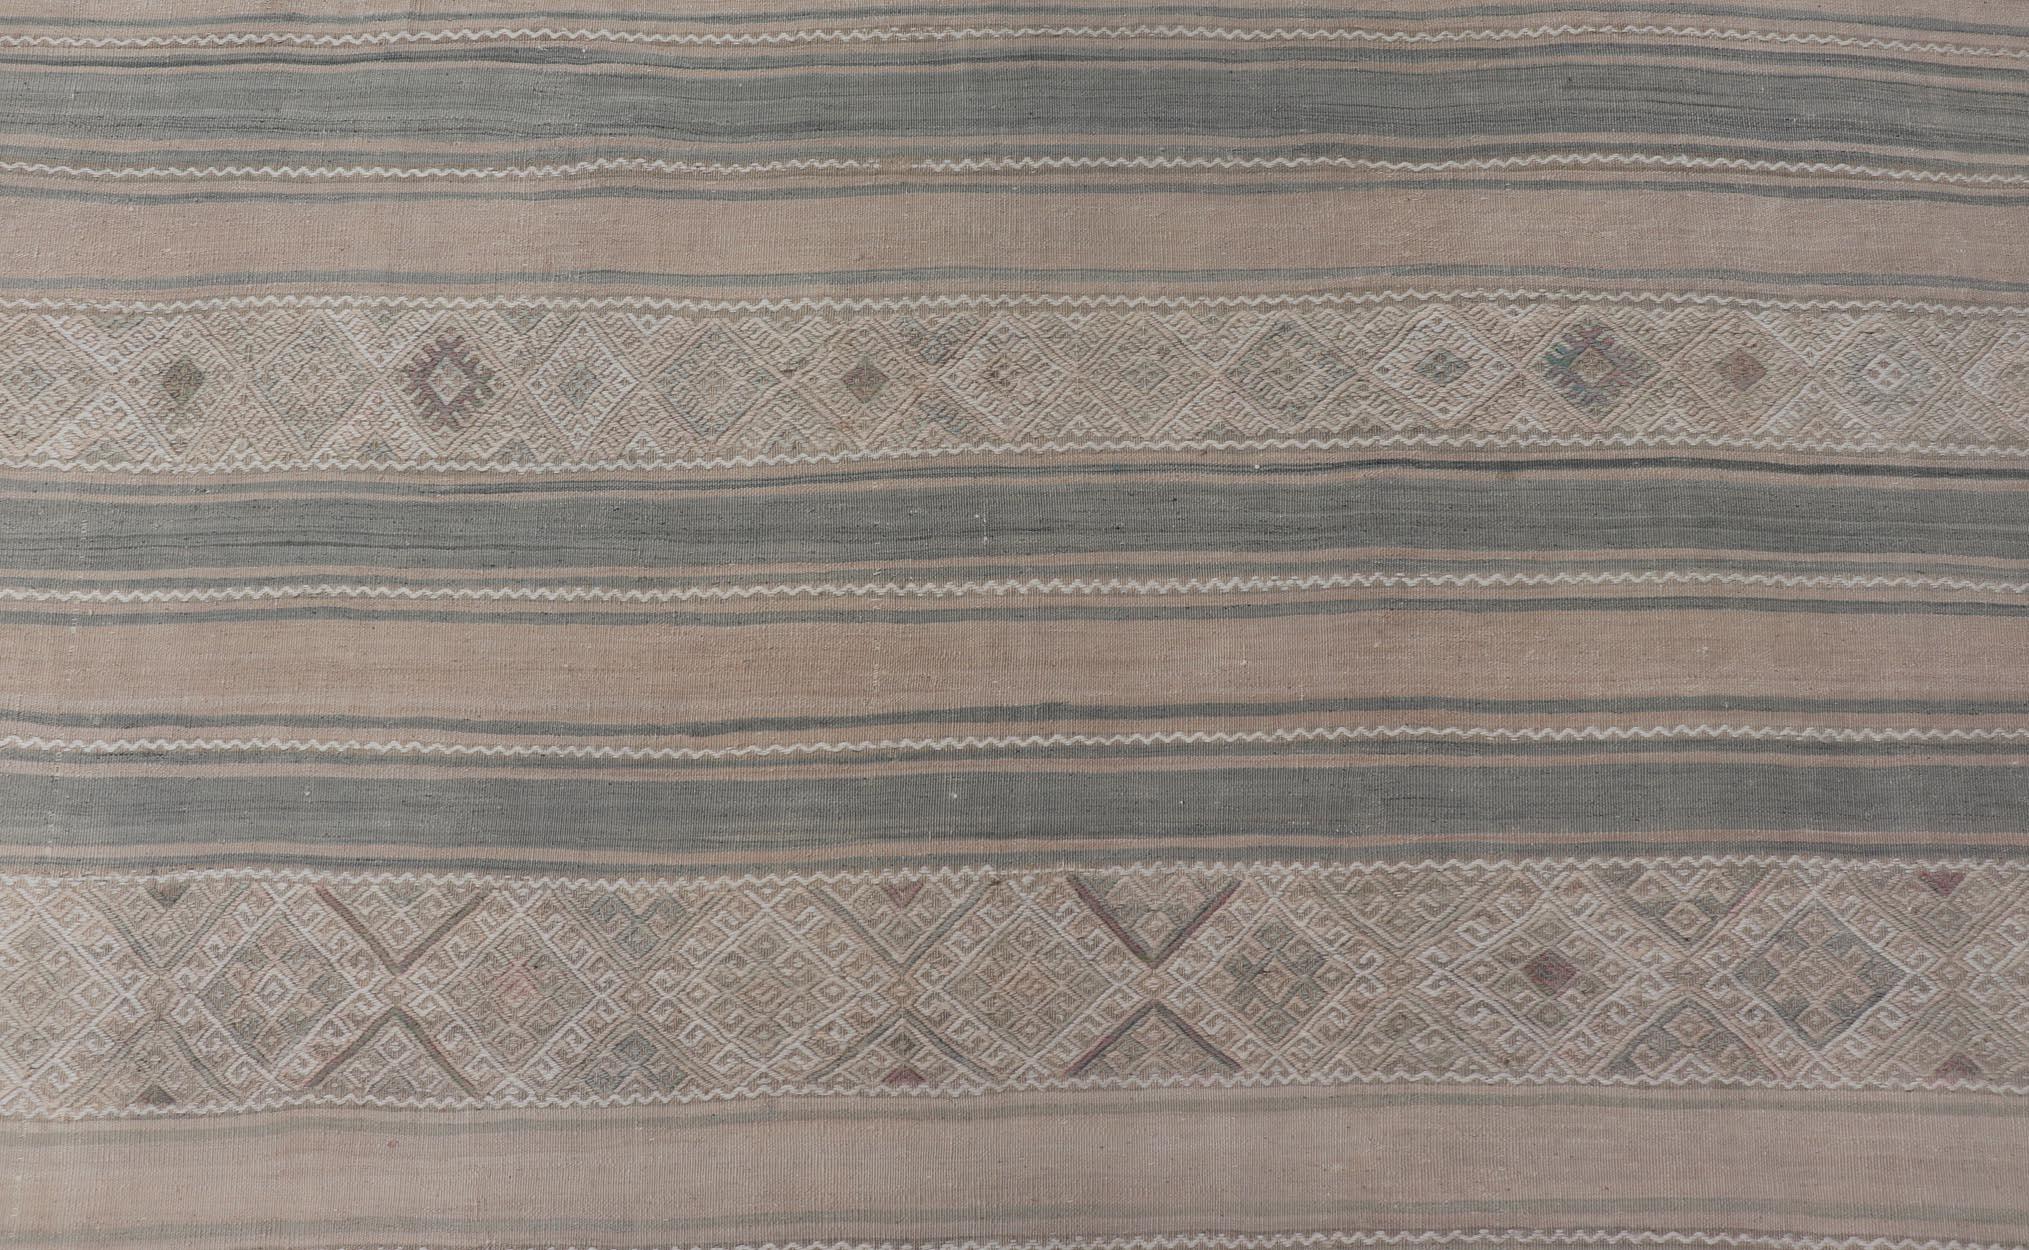 Gallery Vintage Turkish Flat-Weave Kilim with Embroideries in Earthy Tones 3